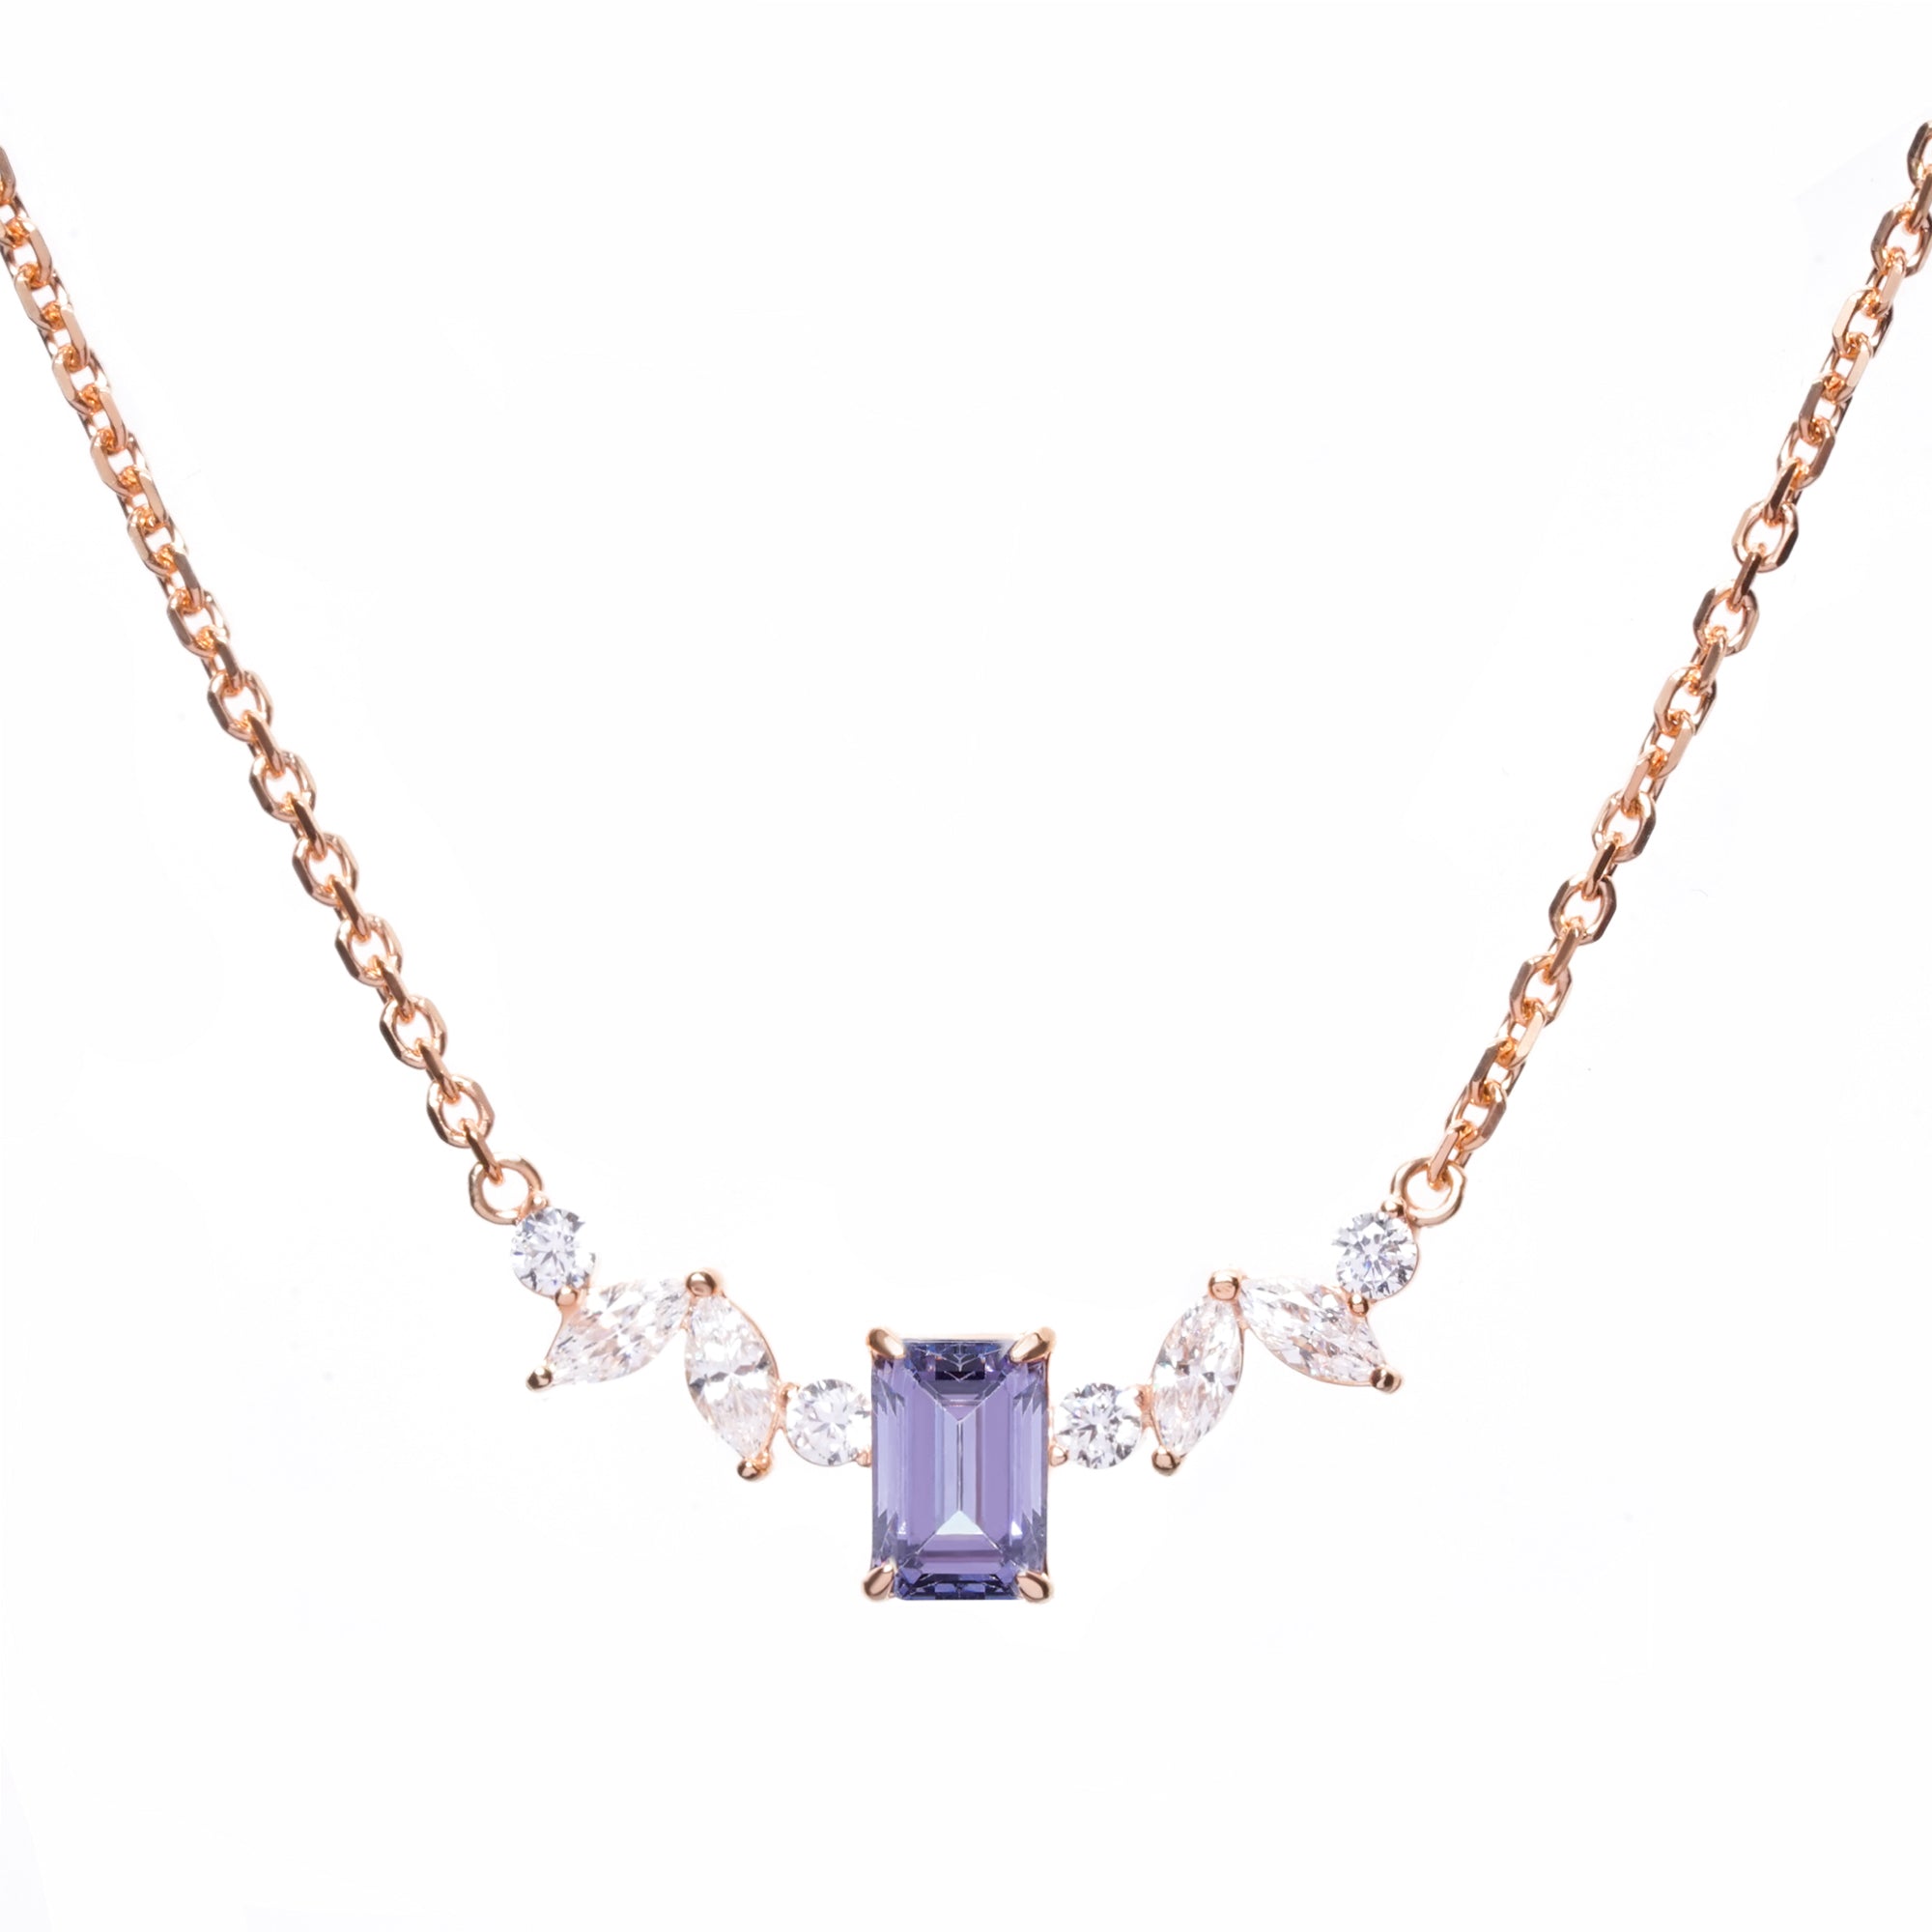 Luisa Gold Necklace - Twilight Collection - Juene Jewelry